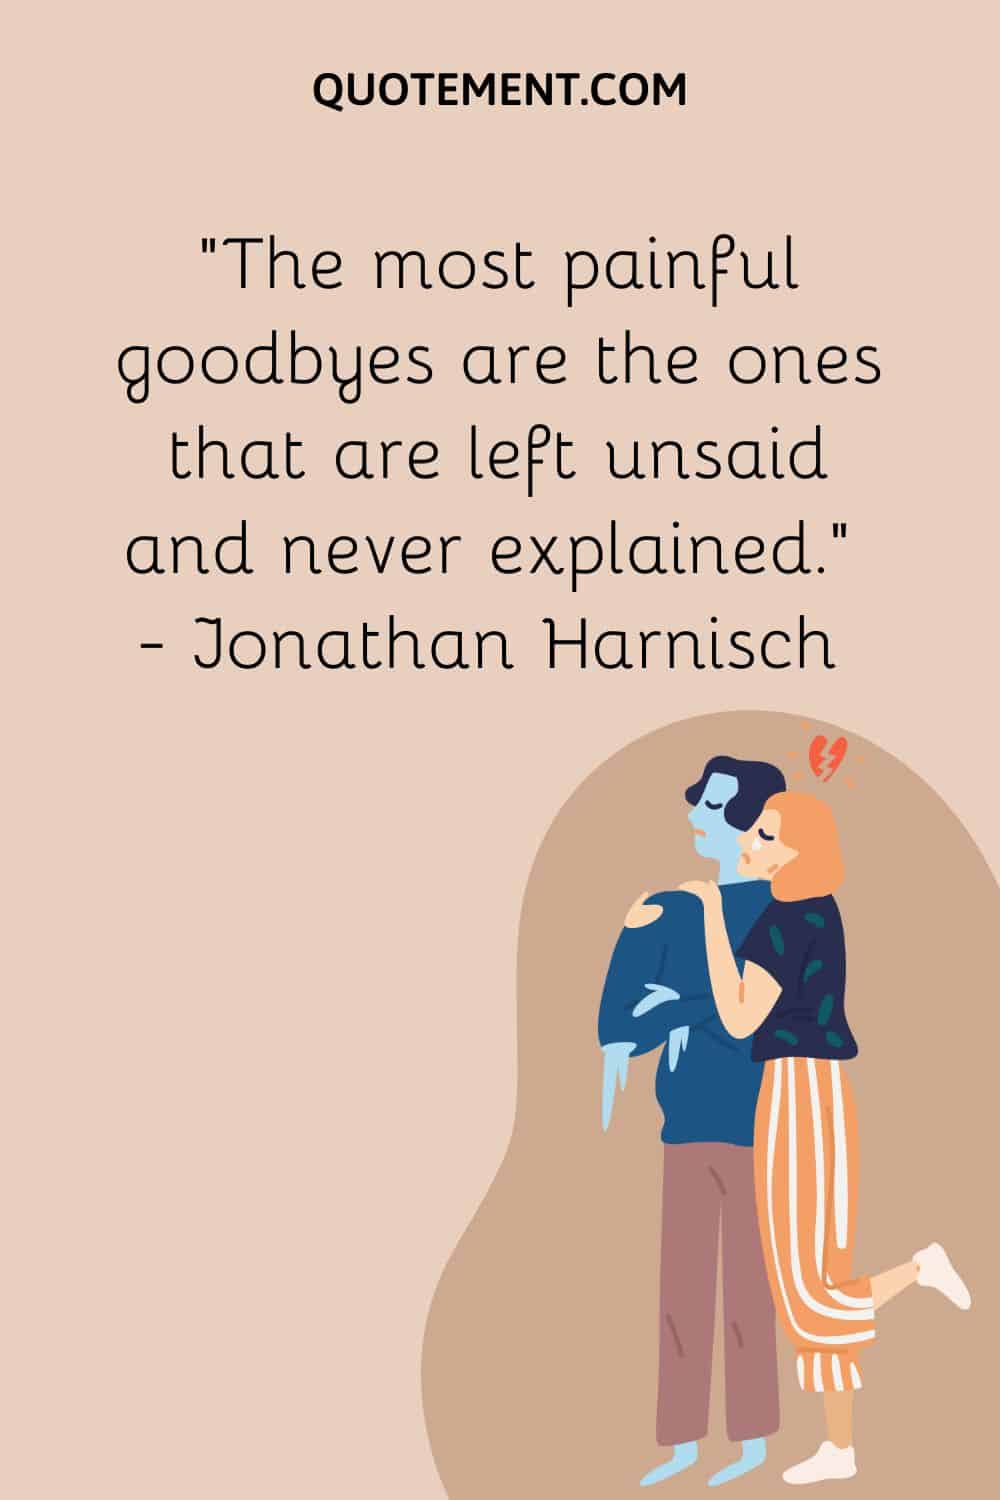 The most painful goodbyes are the ones that are left unsaid and never explained